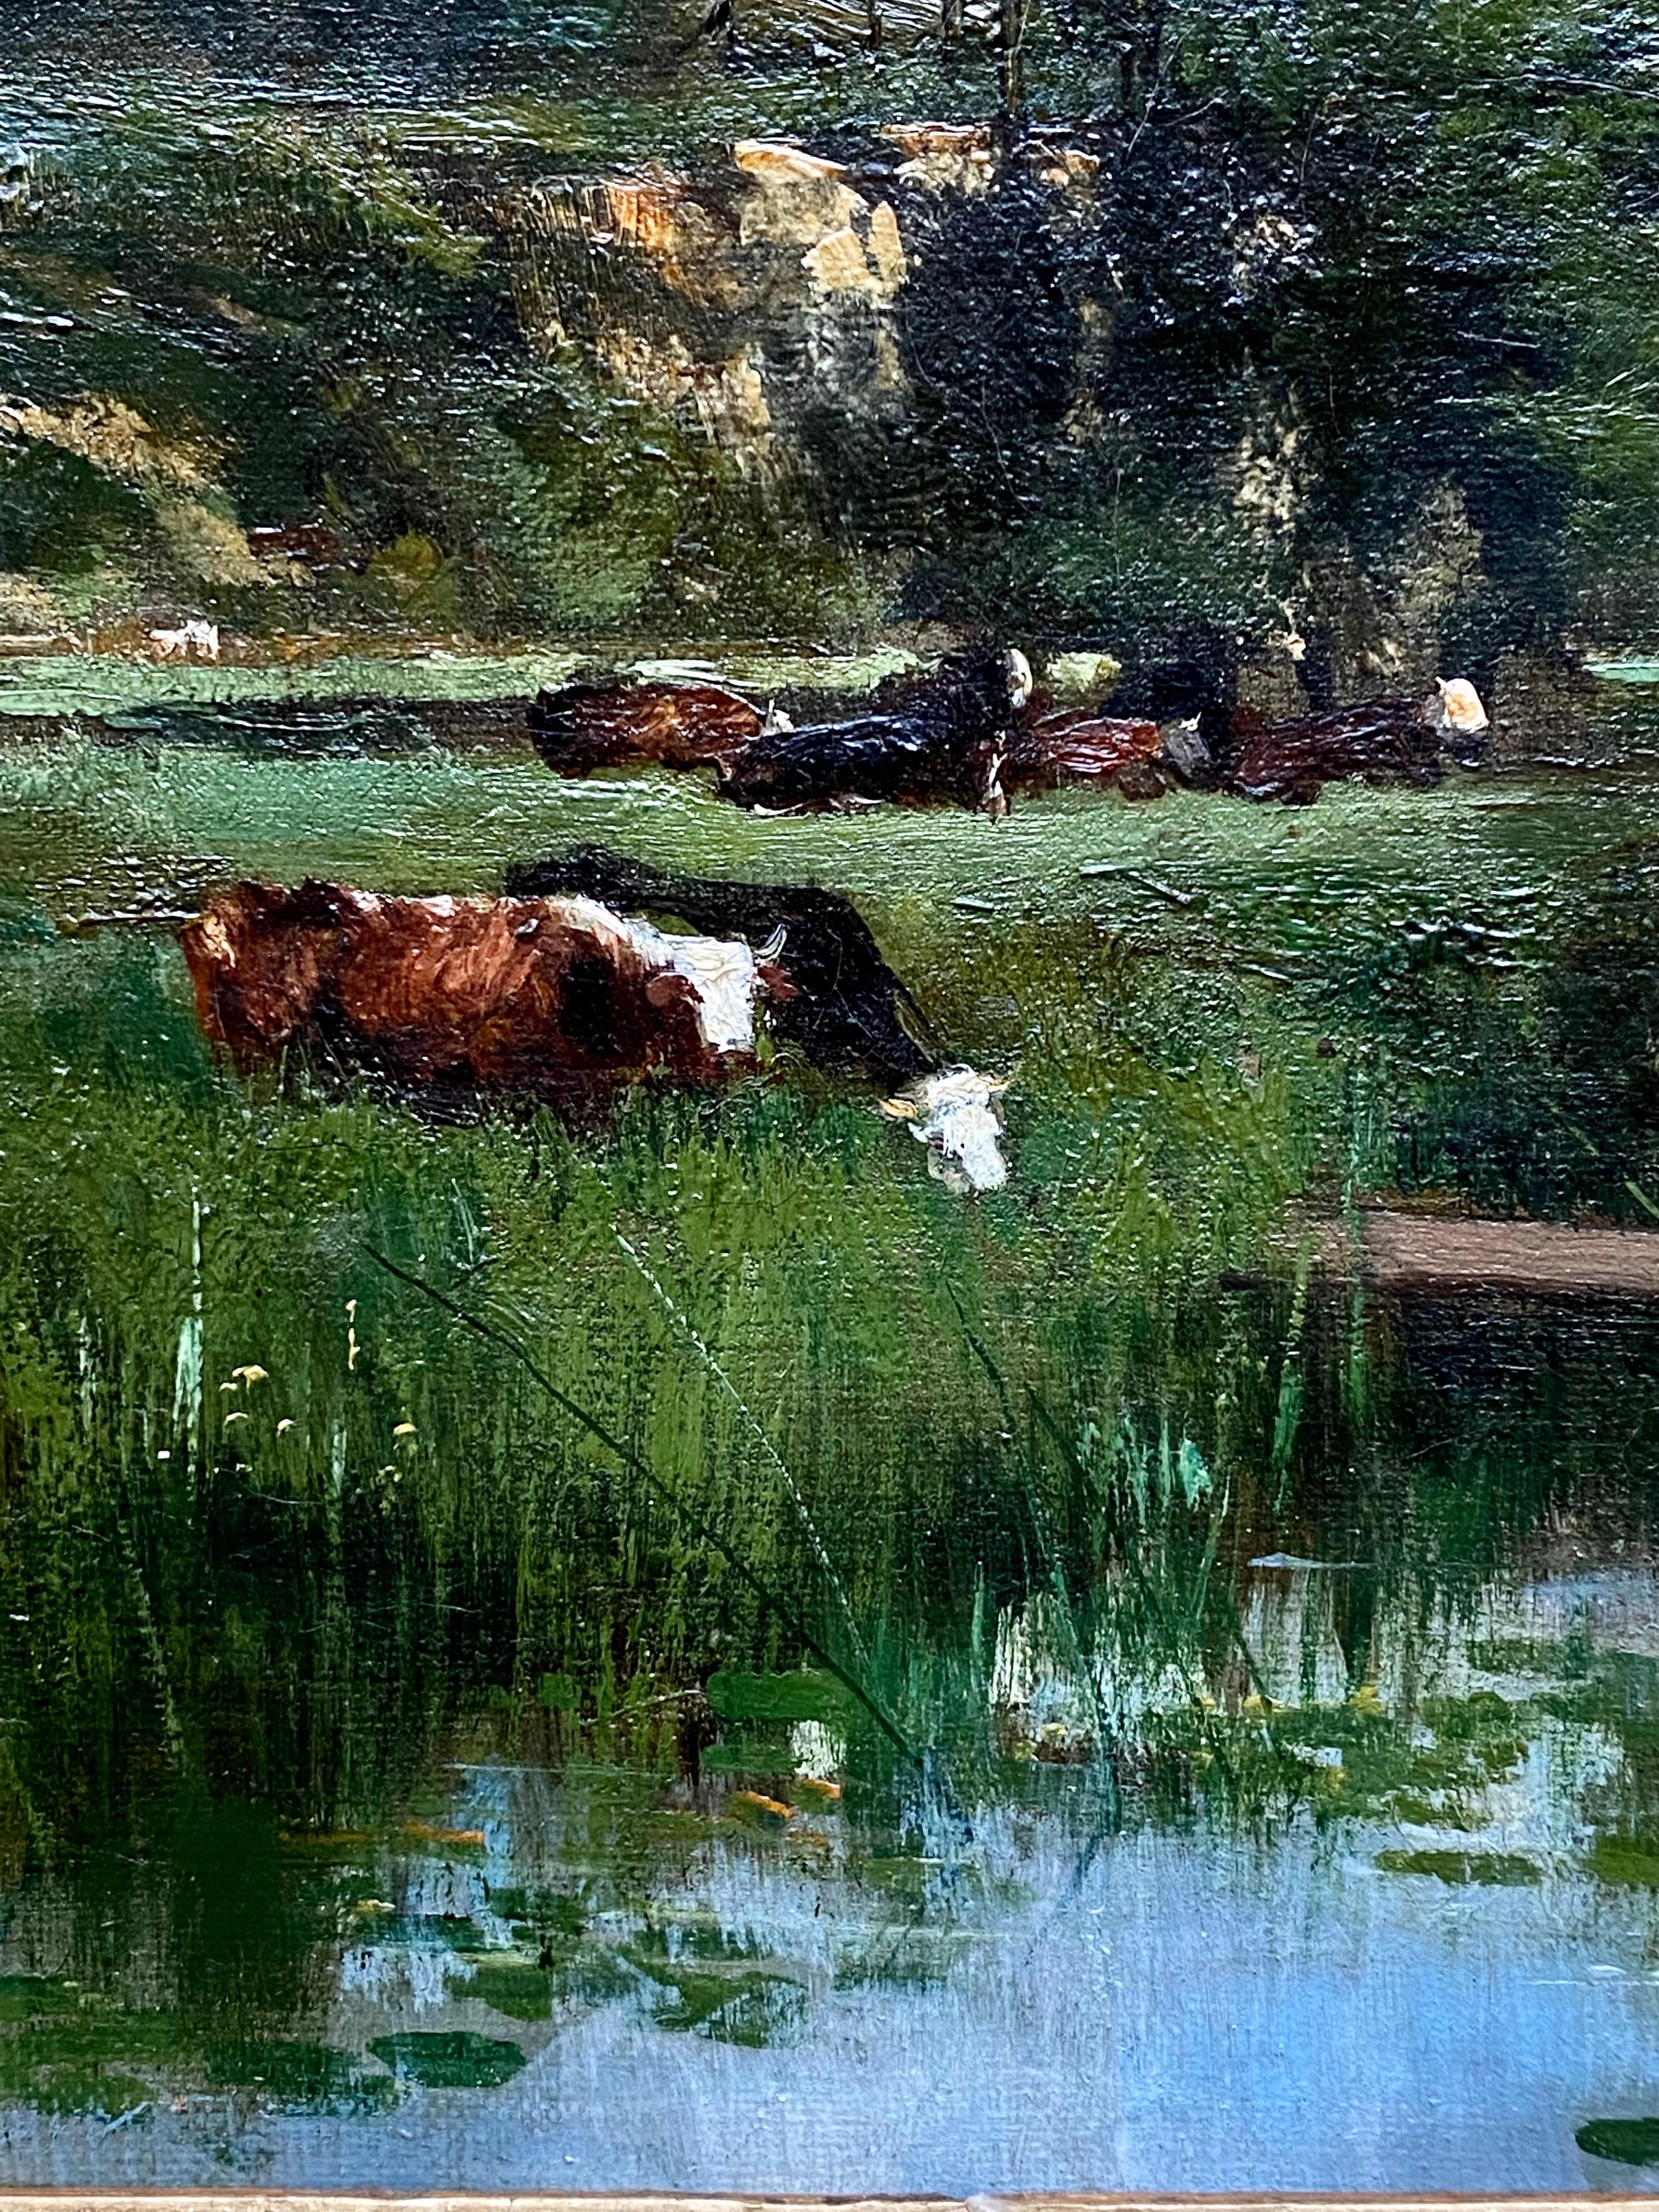 19th century French Barbizon school painting of a hilly countryside. 

Our painting is a beautiful and typical example of the famous Barbizon school landscapes. This peaceful scenery depicts cows grazing and resting in their fields while on top of